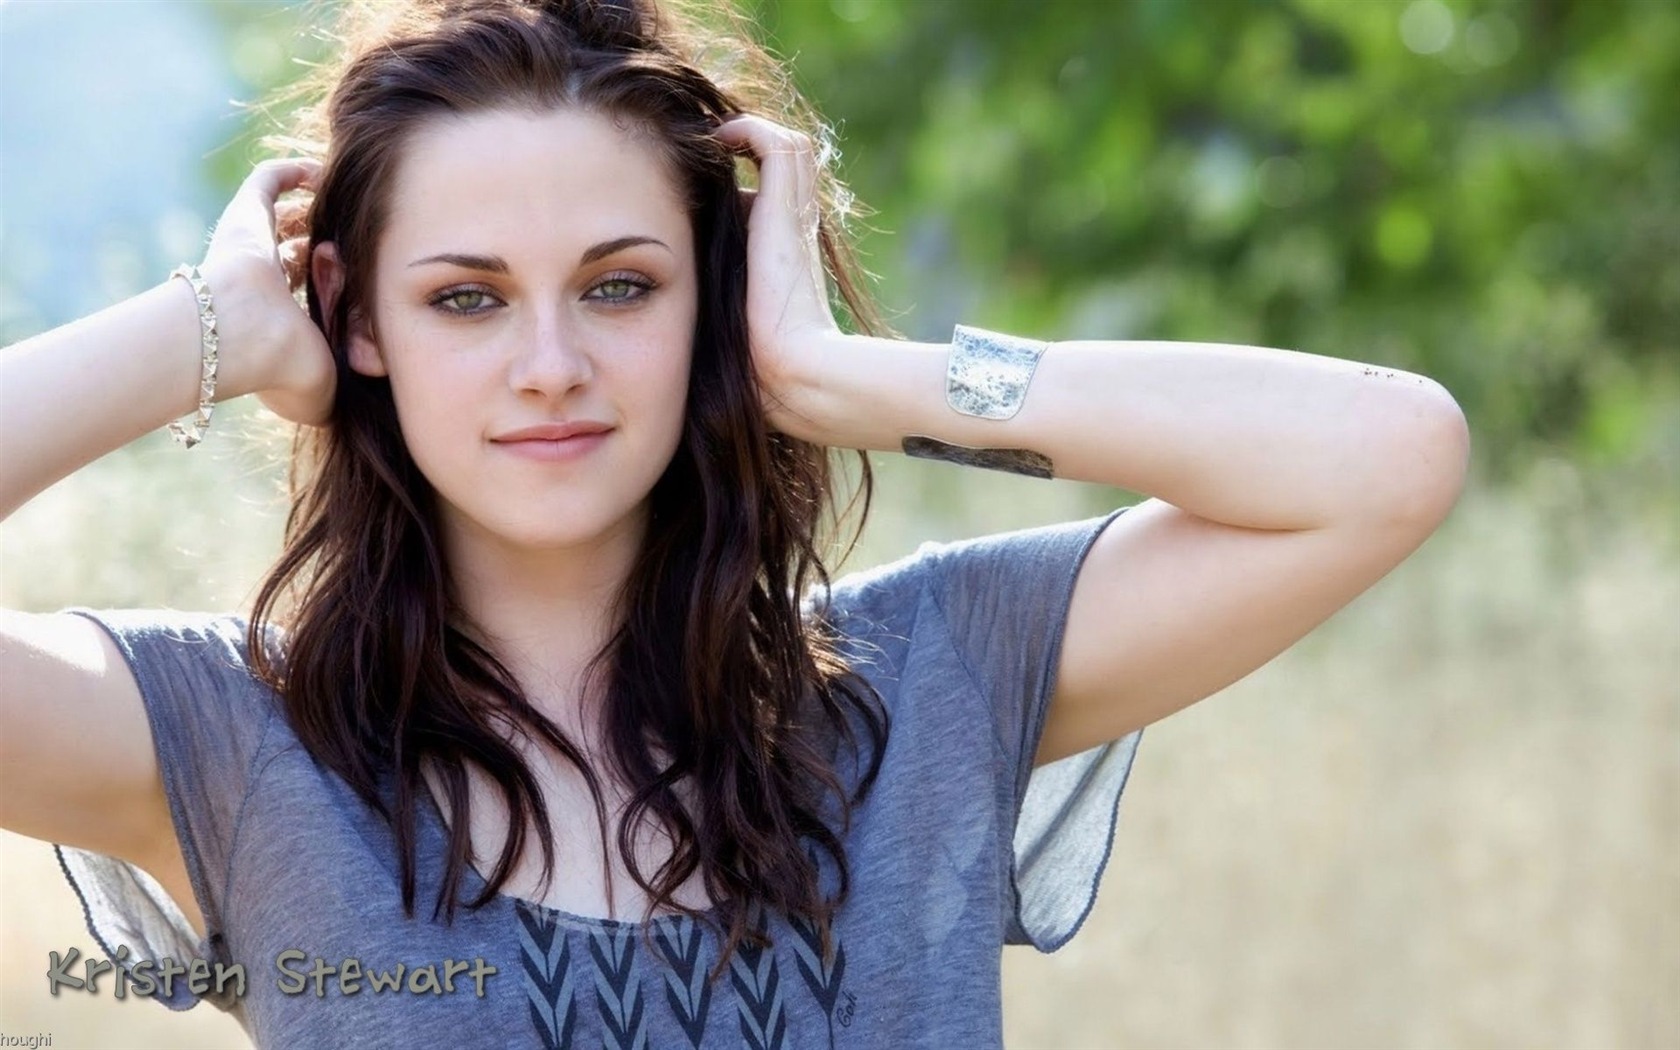 Kristen Stewart #014 - 1680x1050 Wallpapers Pictures Photos Images